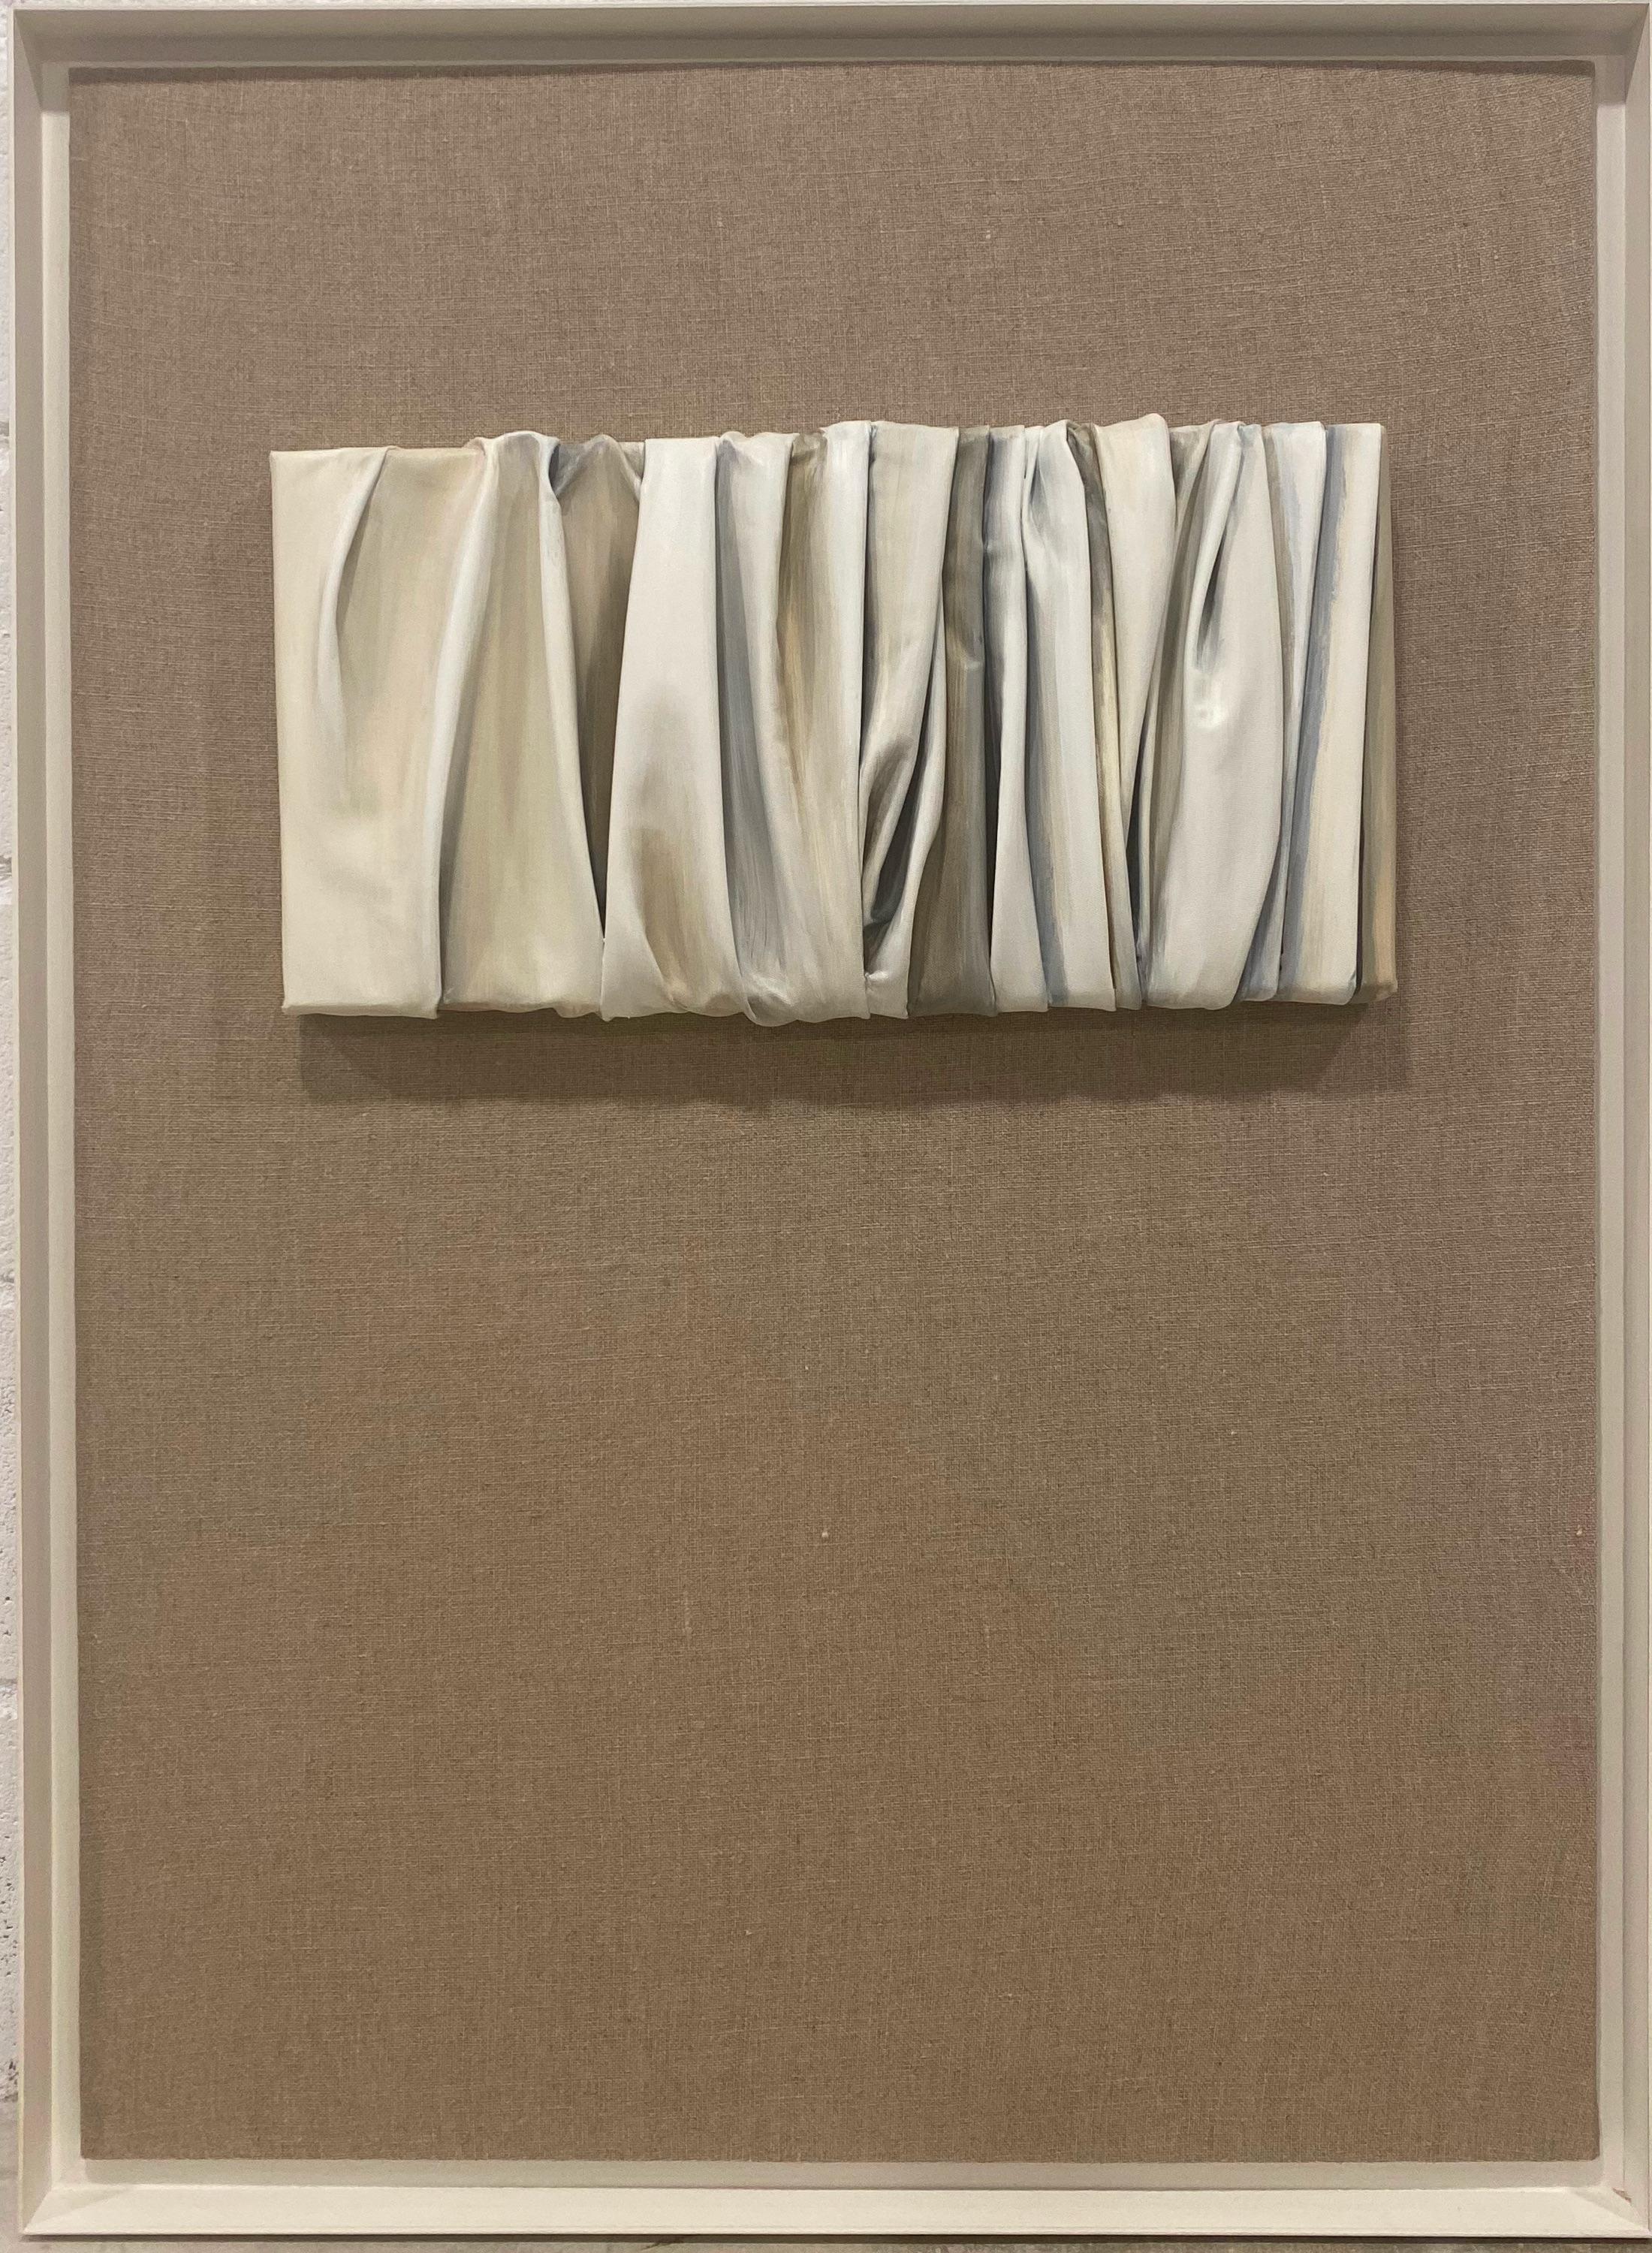 Contemporary Mix Materials Collage, Linen. Shades of Beige, Grey White. Framed  - Mixed Media Art by Cristina Estañ